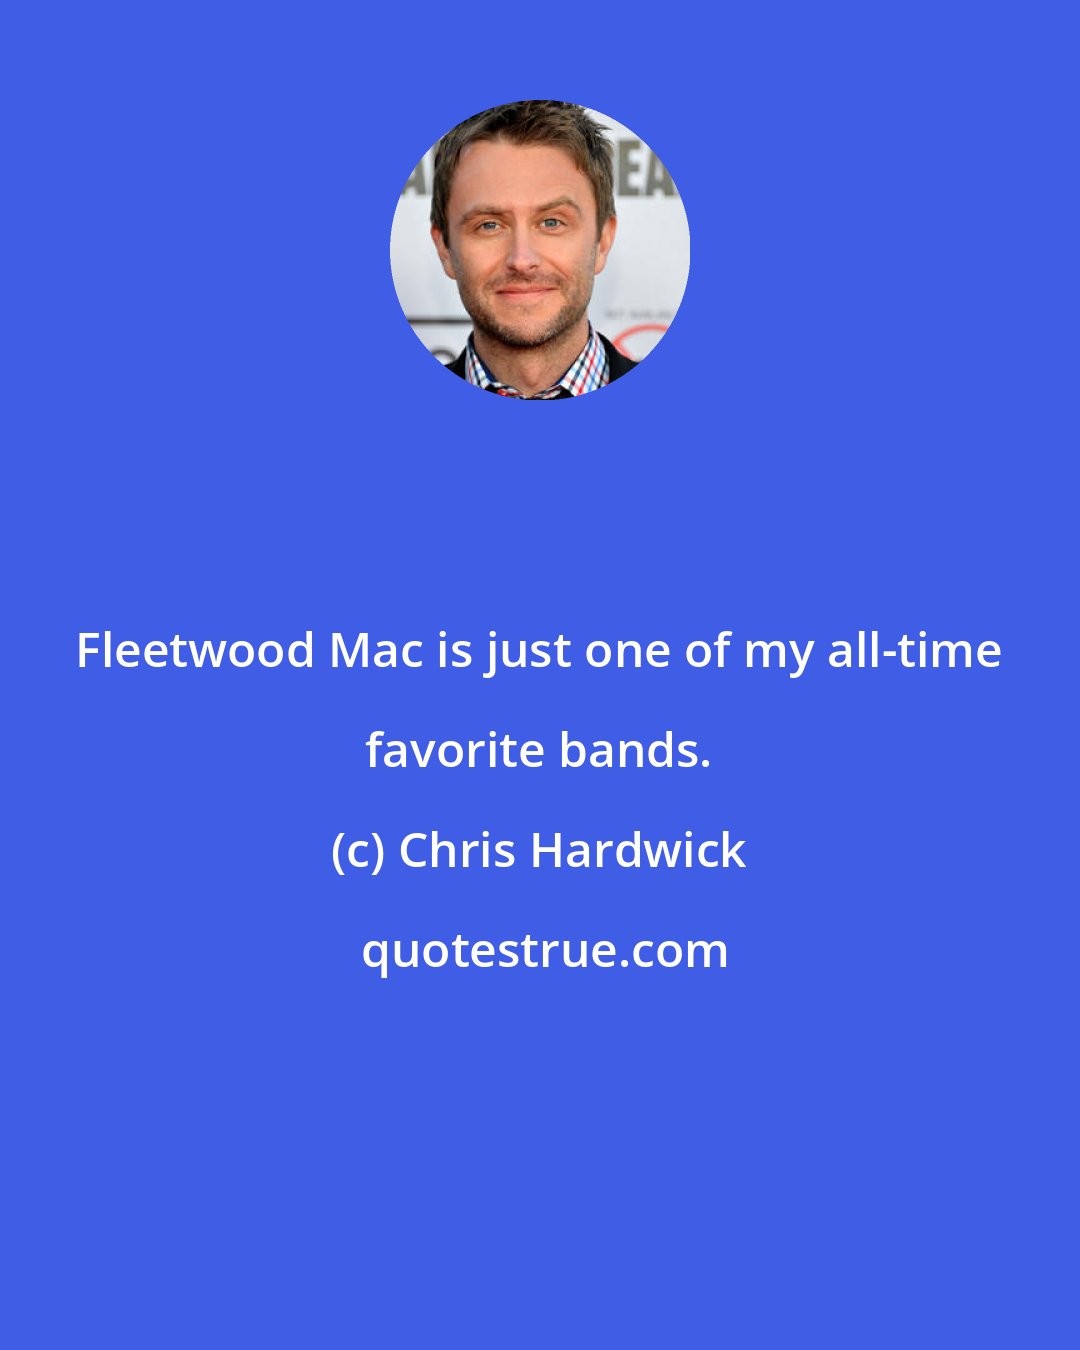 Chris Hardwick: Fleetwood Mac is just one of my all-time favorite bands.